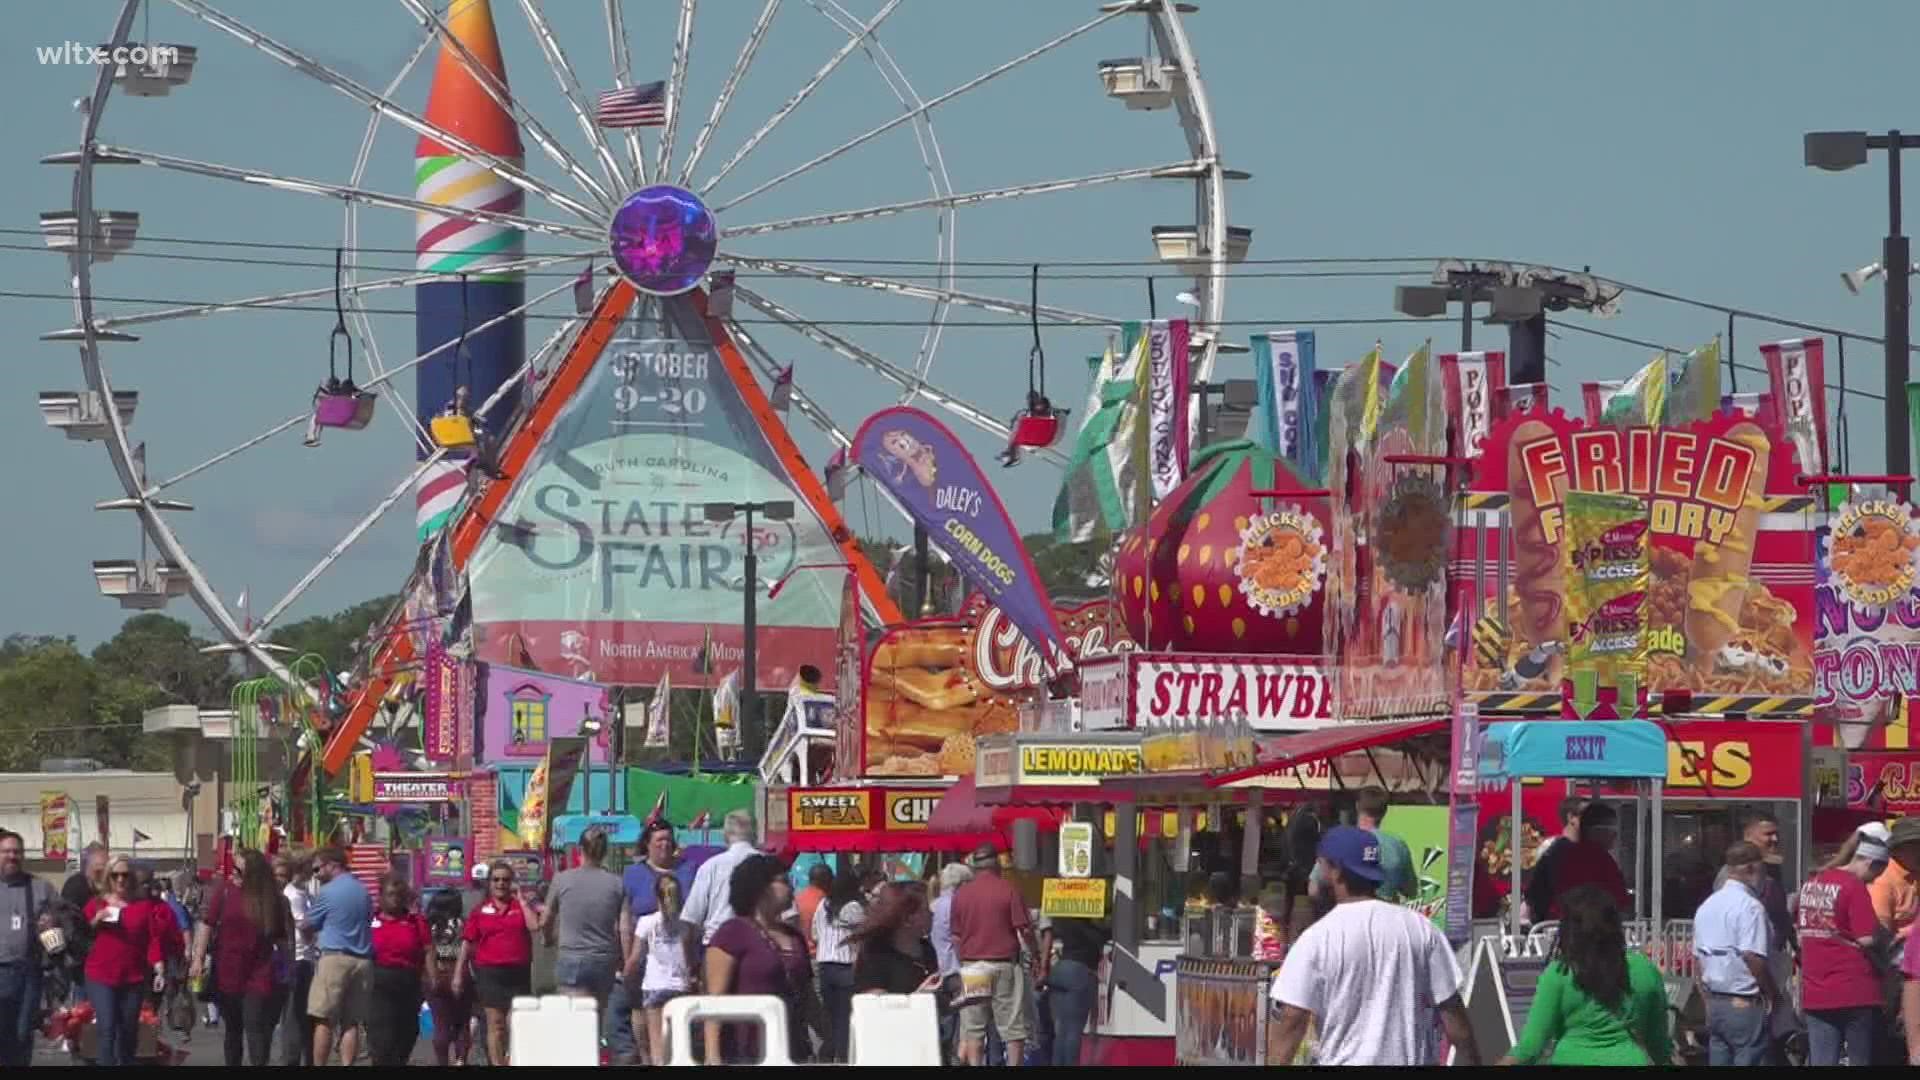 Some followers of the South Carolina State Fair Facebook page were targeted by scammers this week, according to fair officials. Here's what happened.